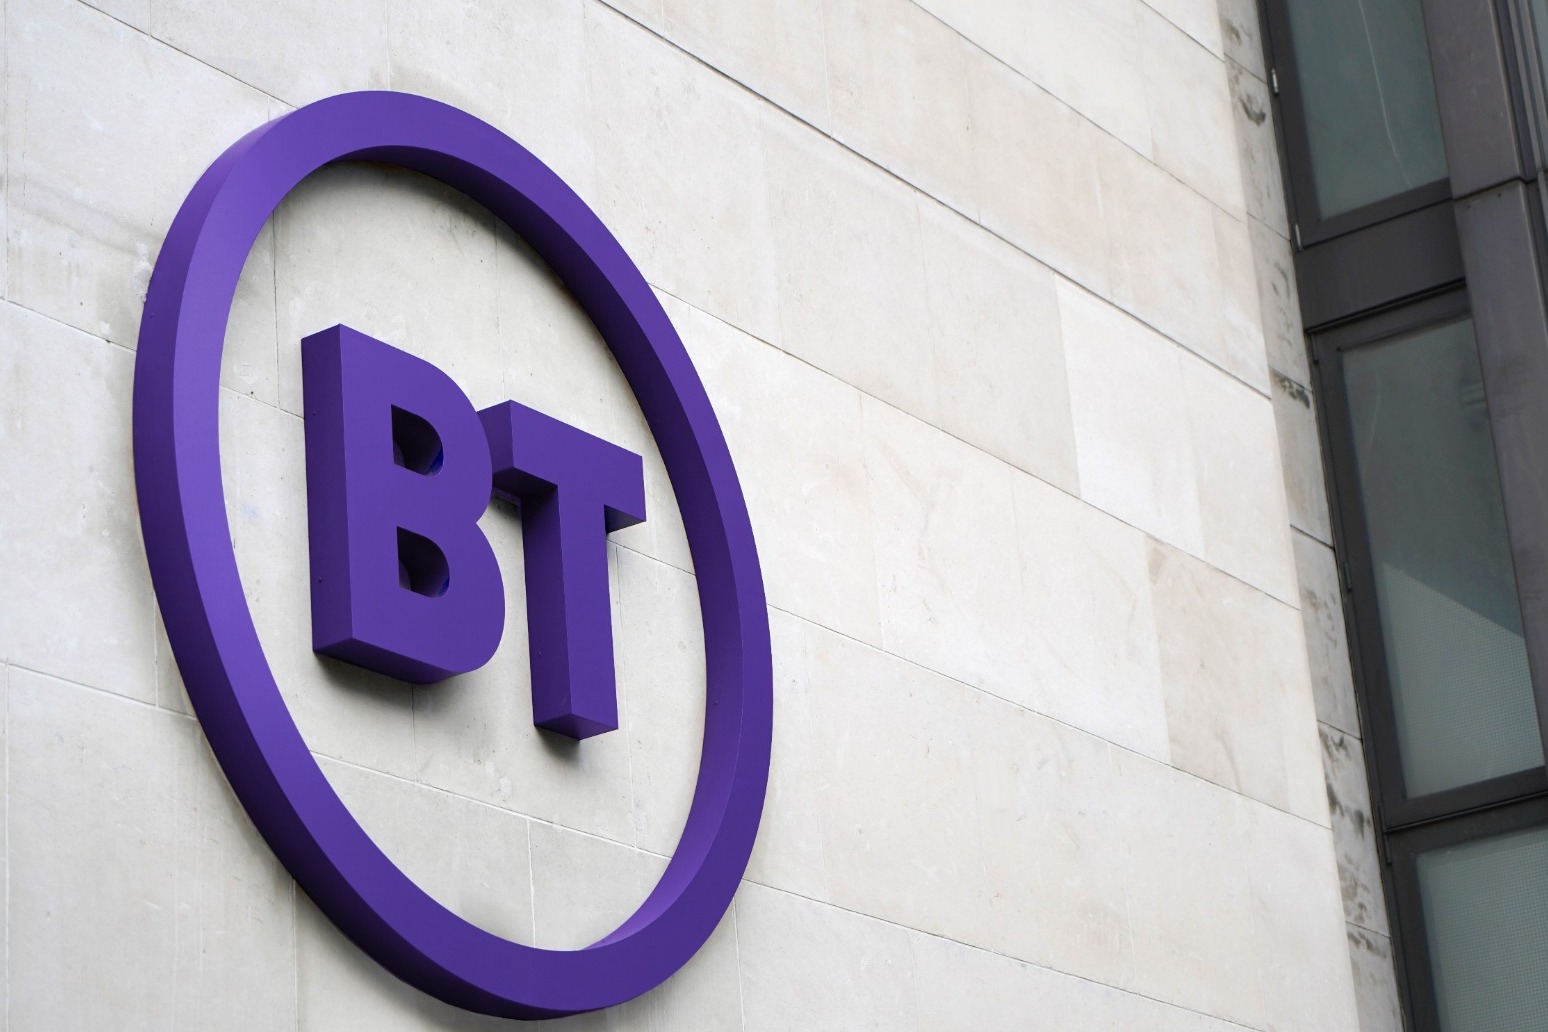 Government to probe French billionaire’s BT stake over national security fears 